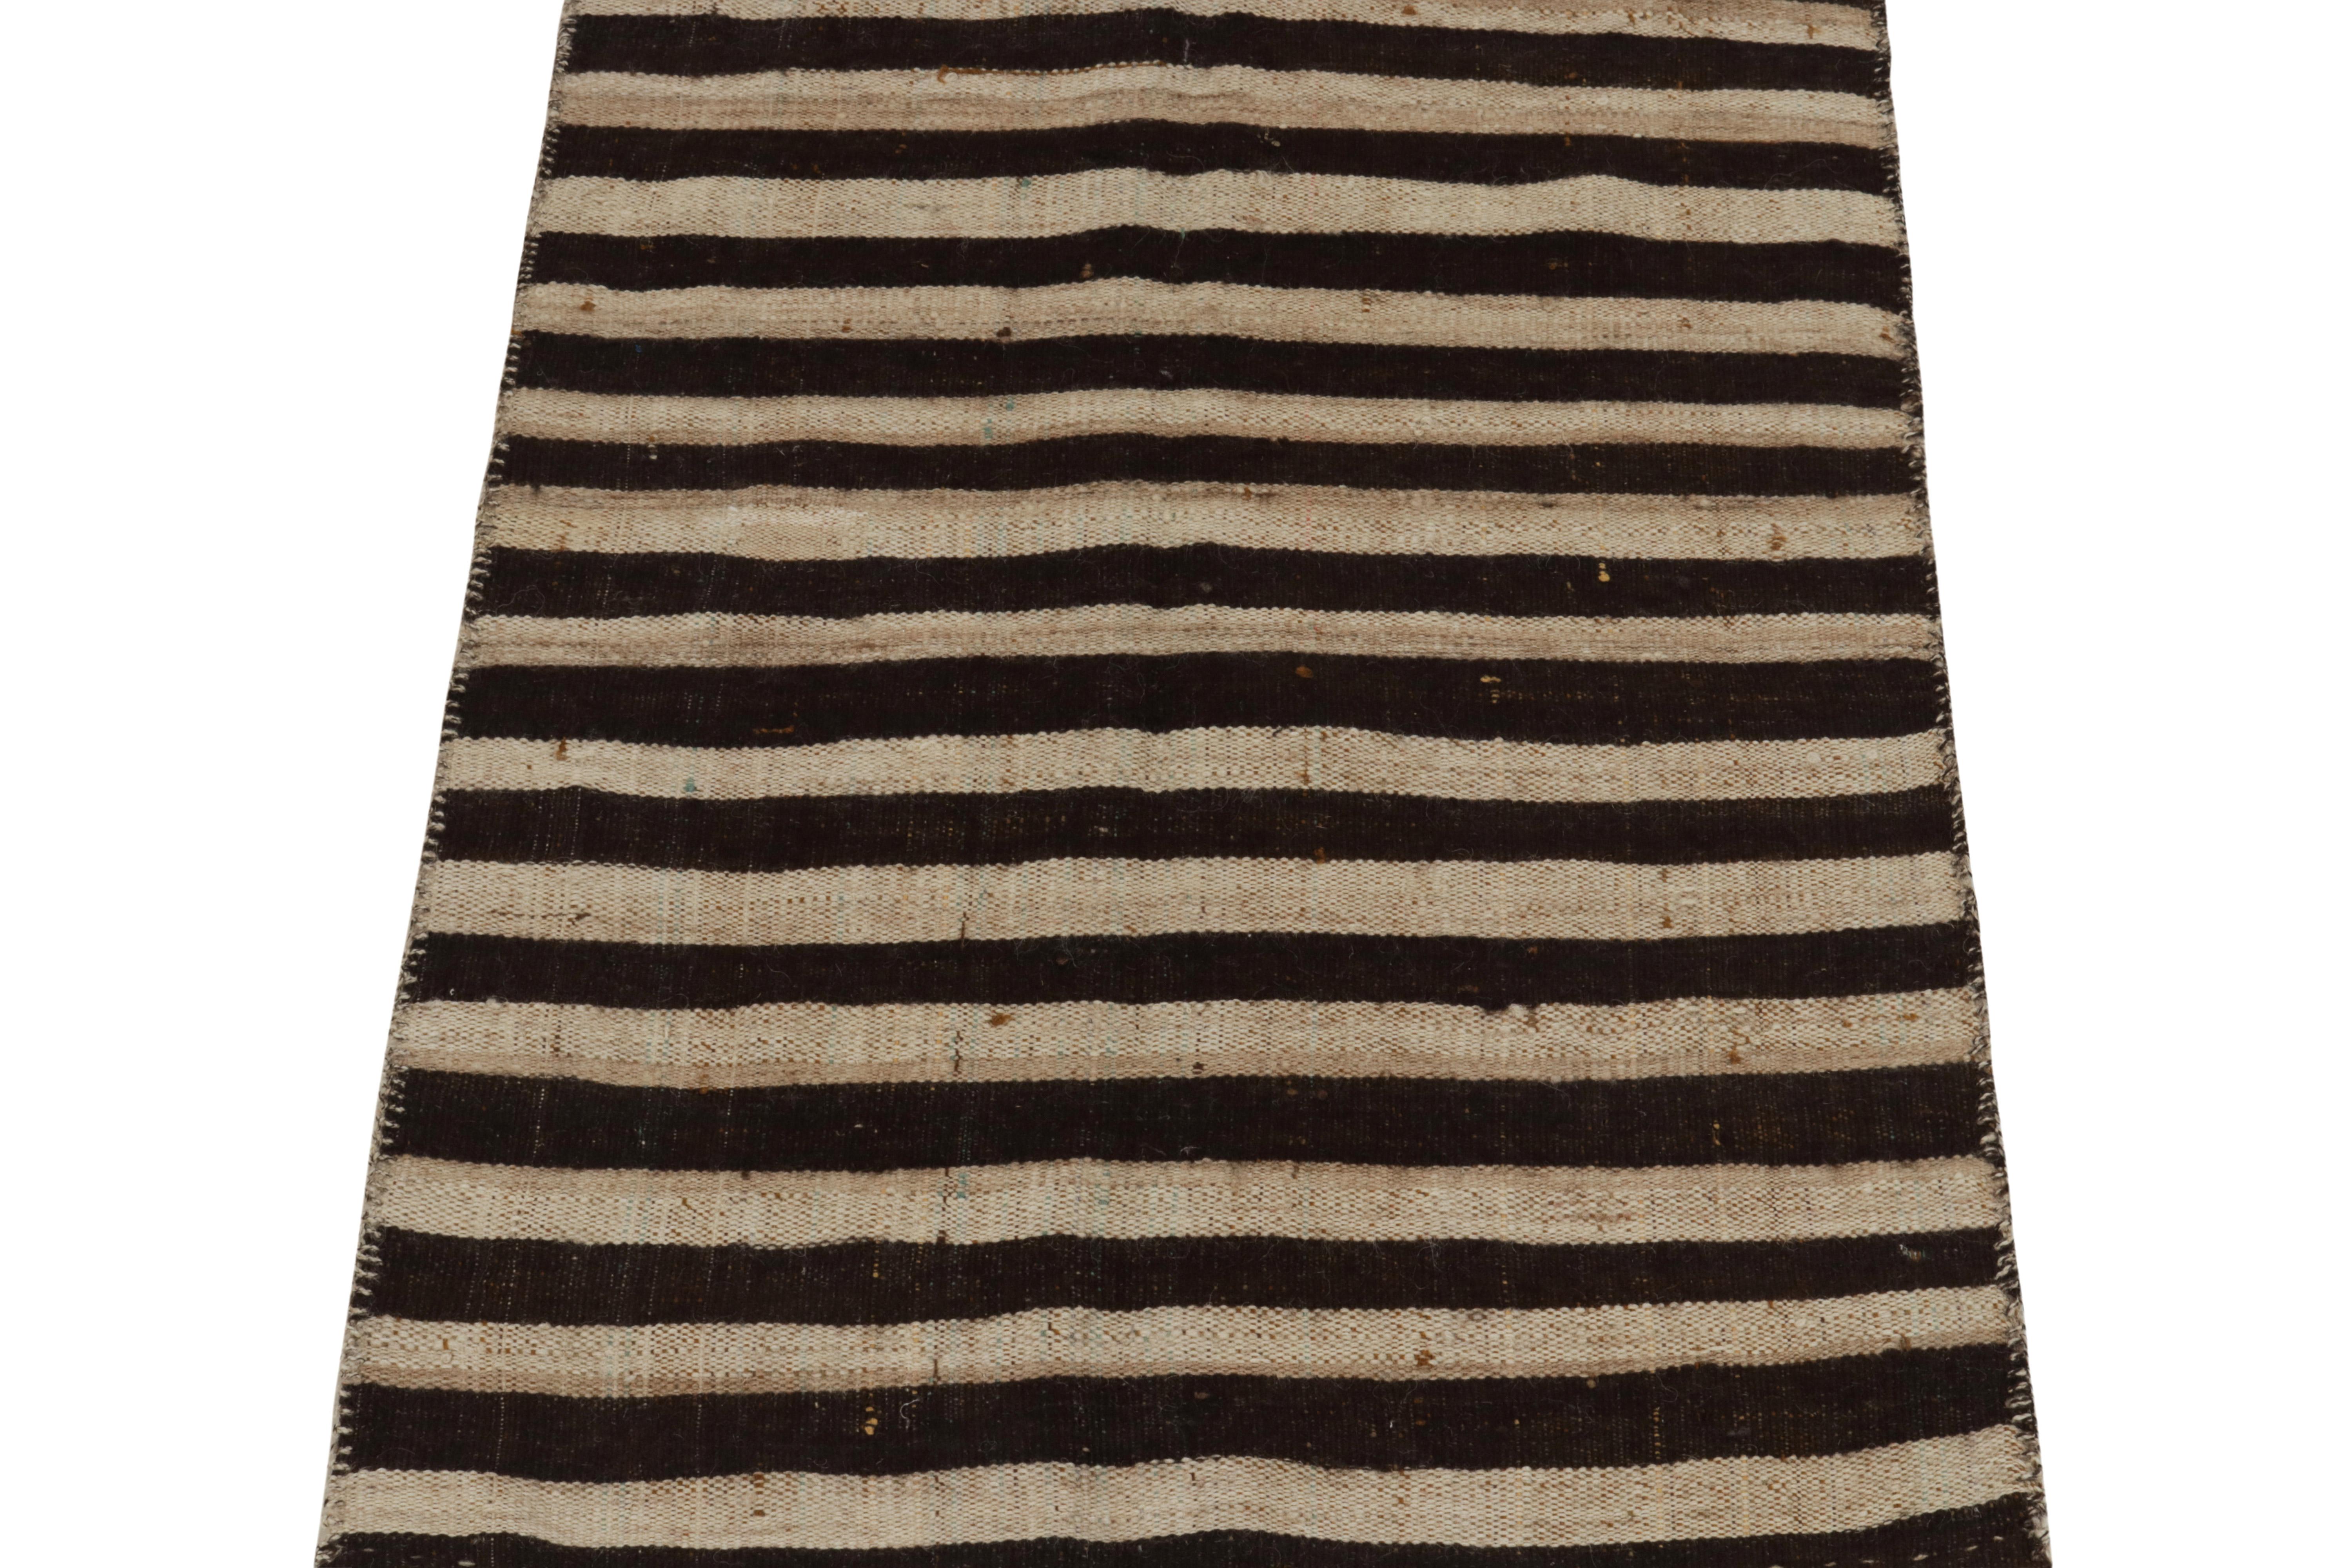 Hand-Knotted Modern Kilim runners in Beige-Brown & Black Stripe Patterns, set by Rug & Kilim For Sale